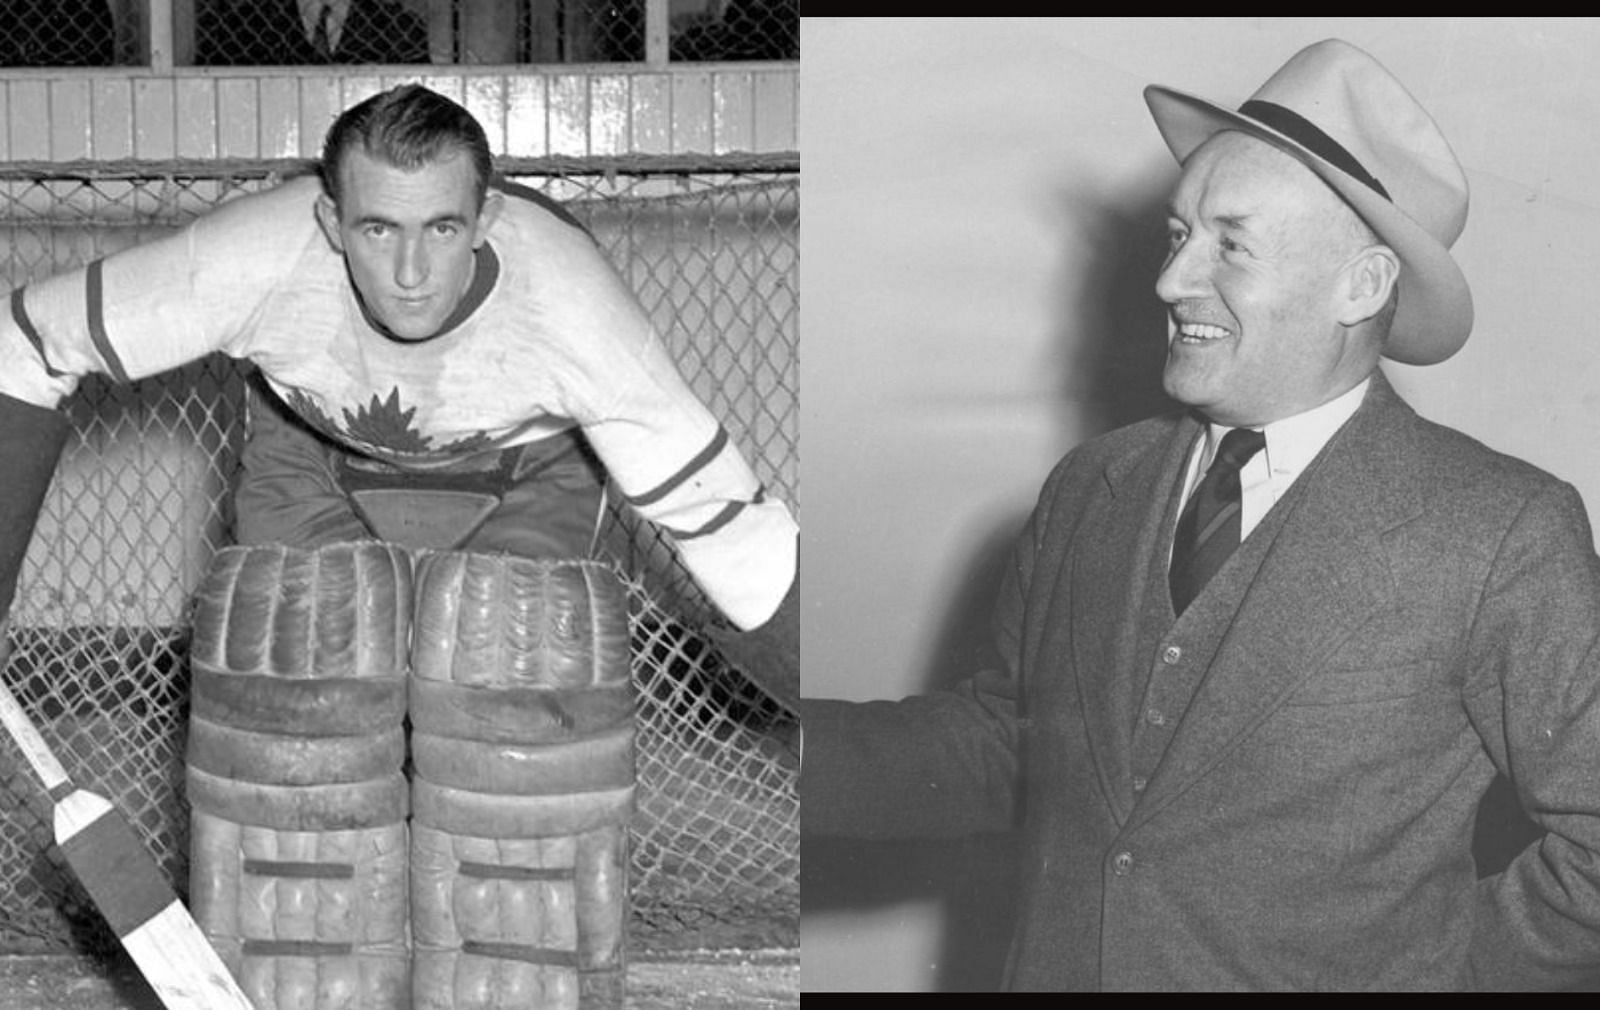 When Toronto Maple Leafs goalie John McCool was thrown out of the team for demanding a raise because of ulcers